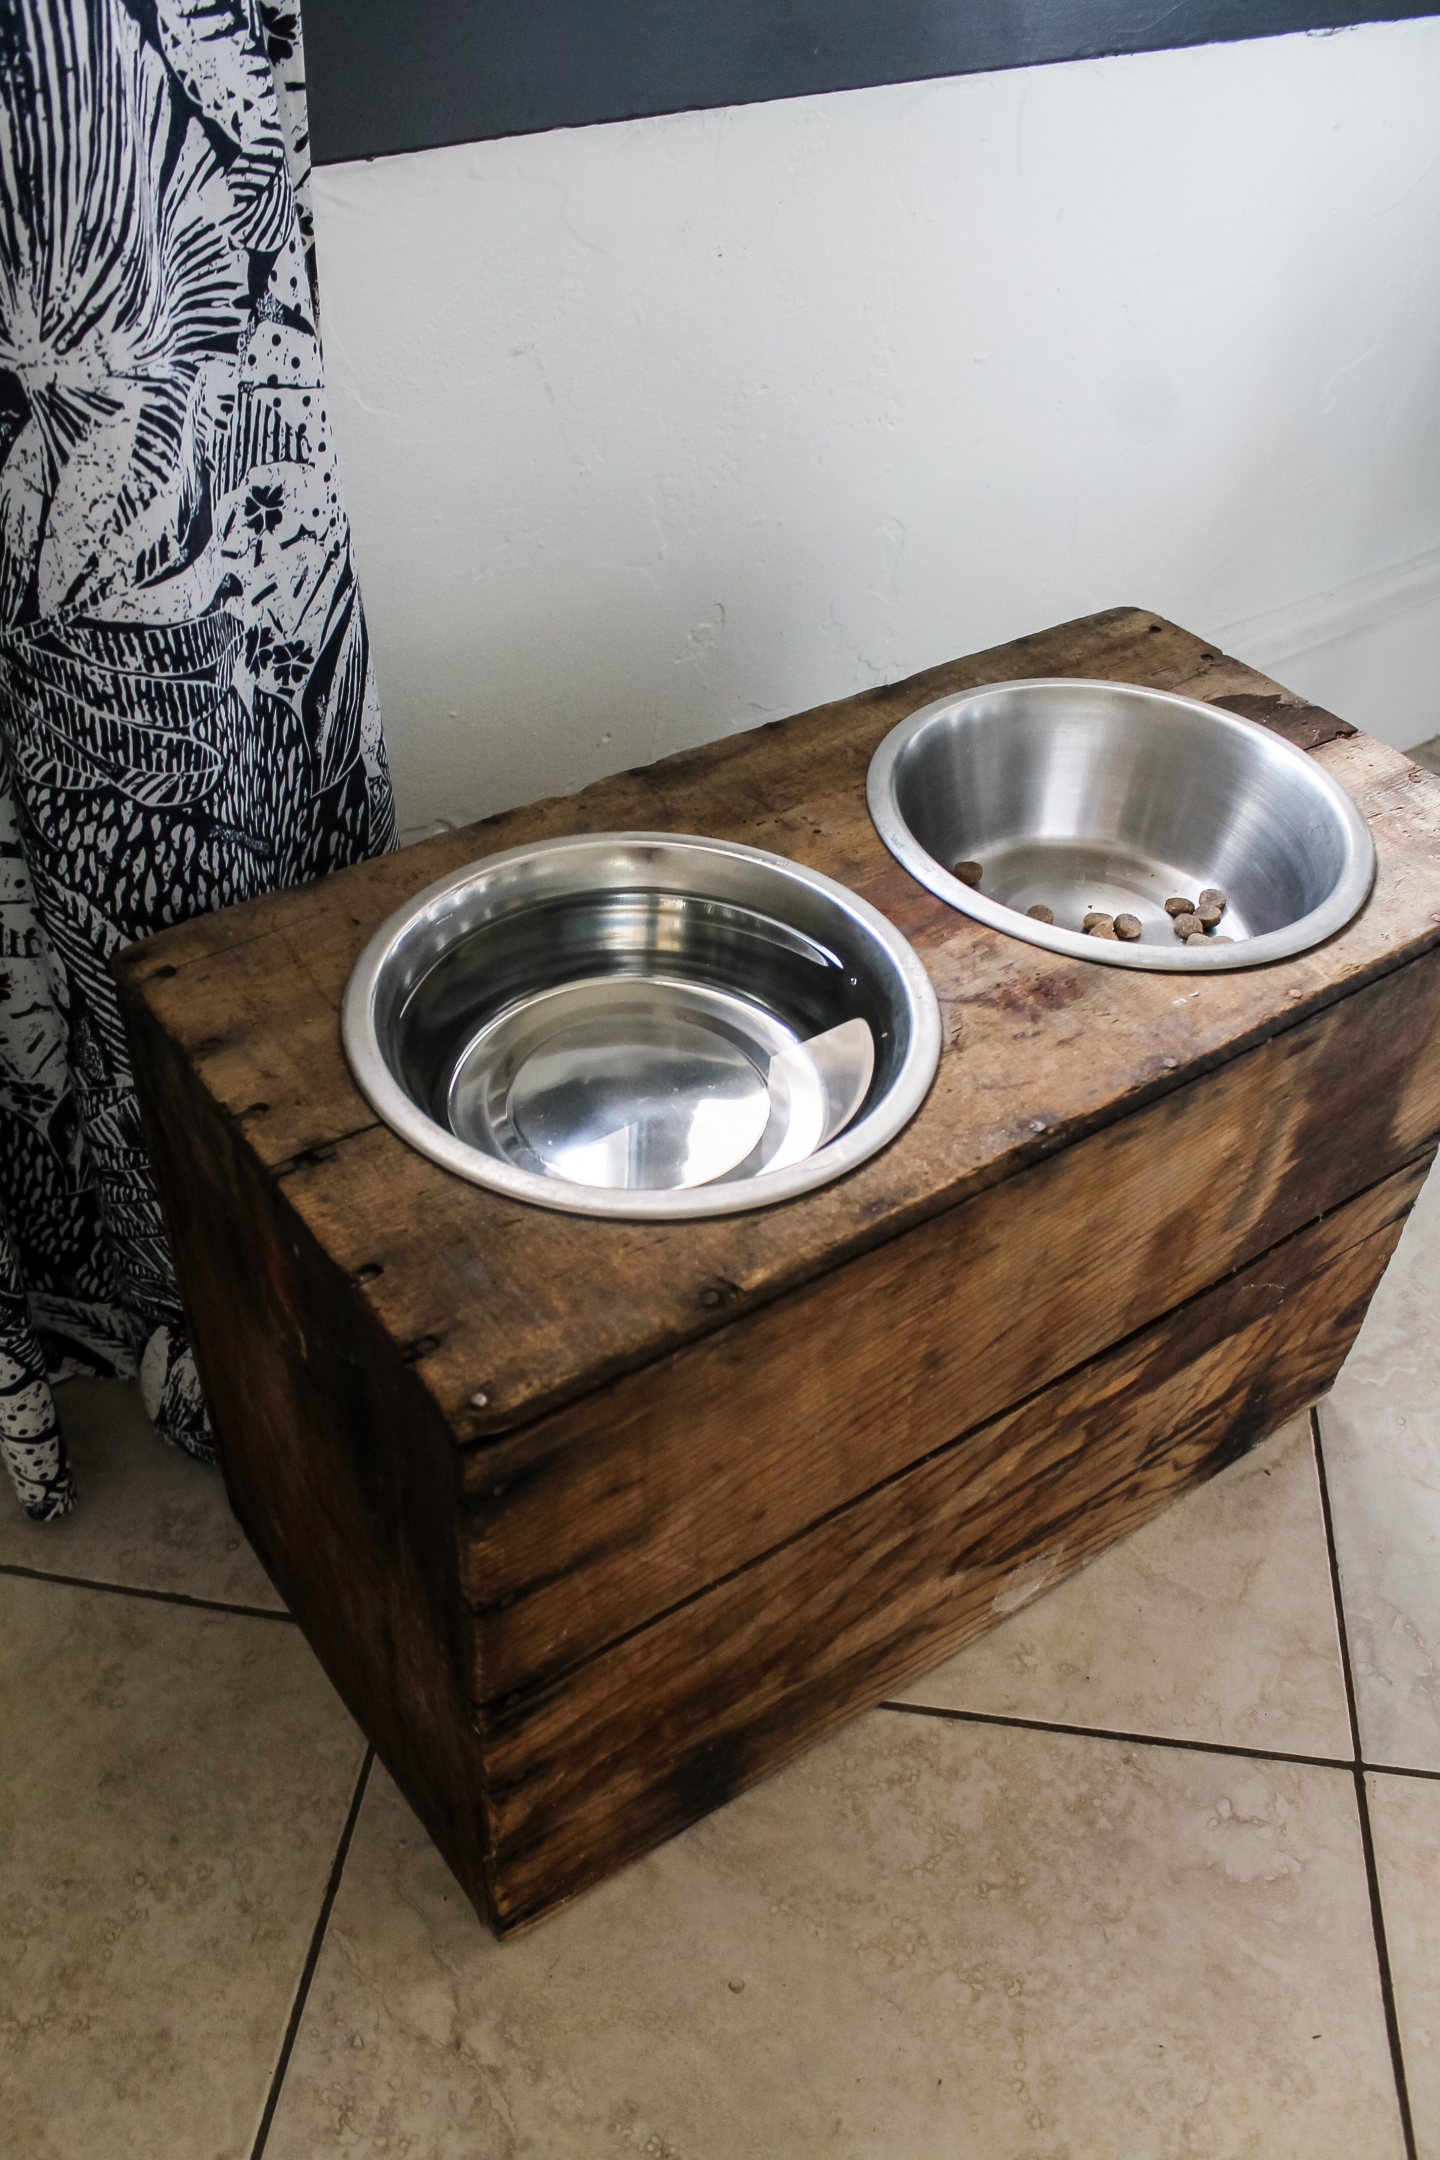 How to Make a DOG DISH STAND USING A WOOD CRATE - The Wicker House